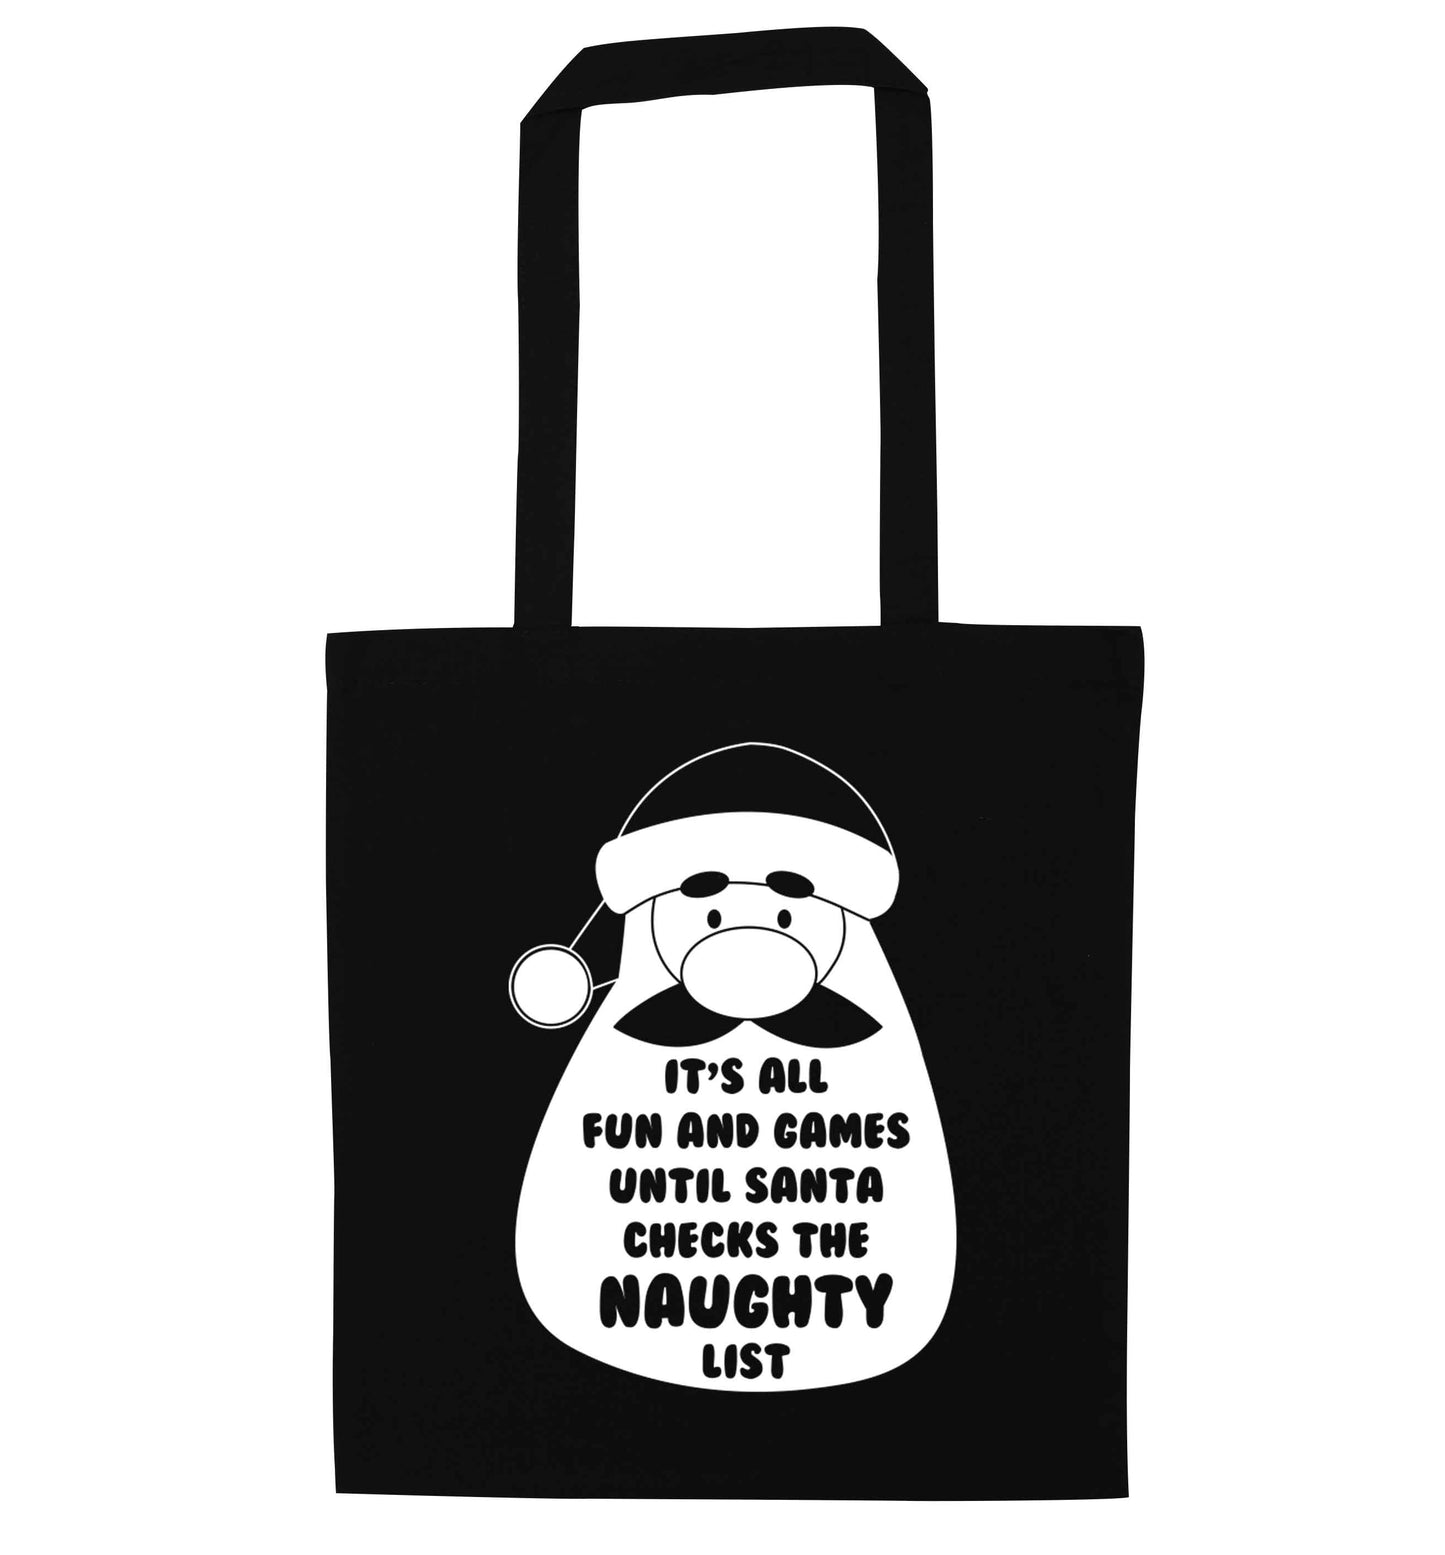 It's all fun and games until Santa checks the naughty list black tote bag